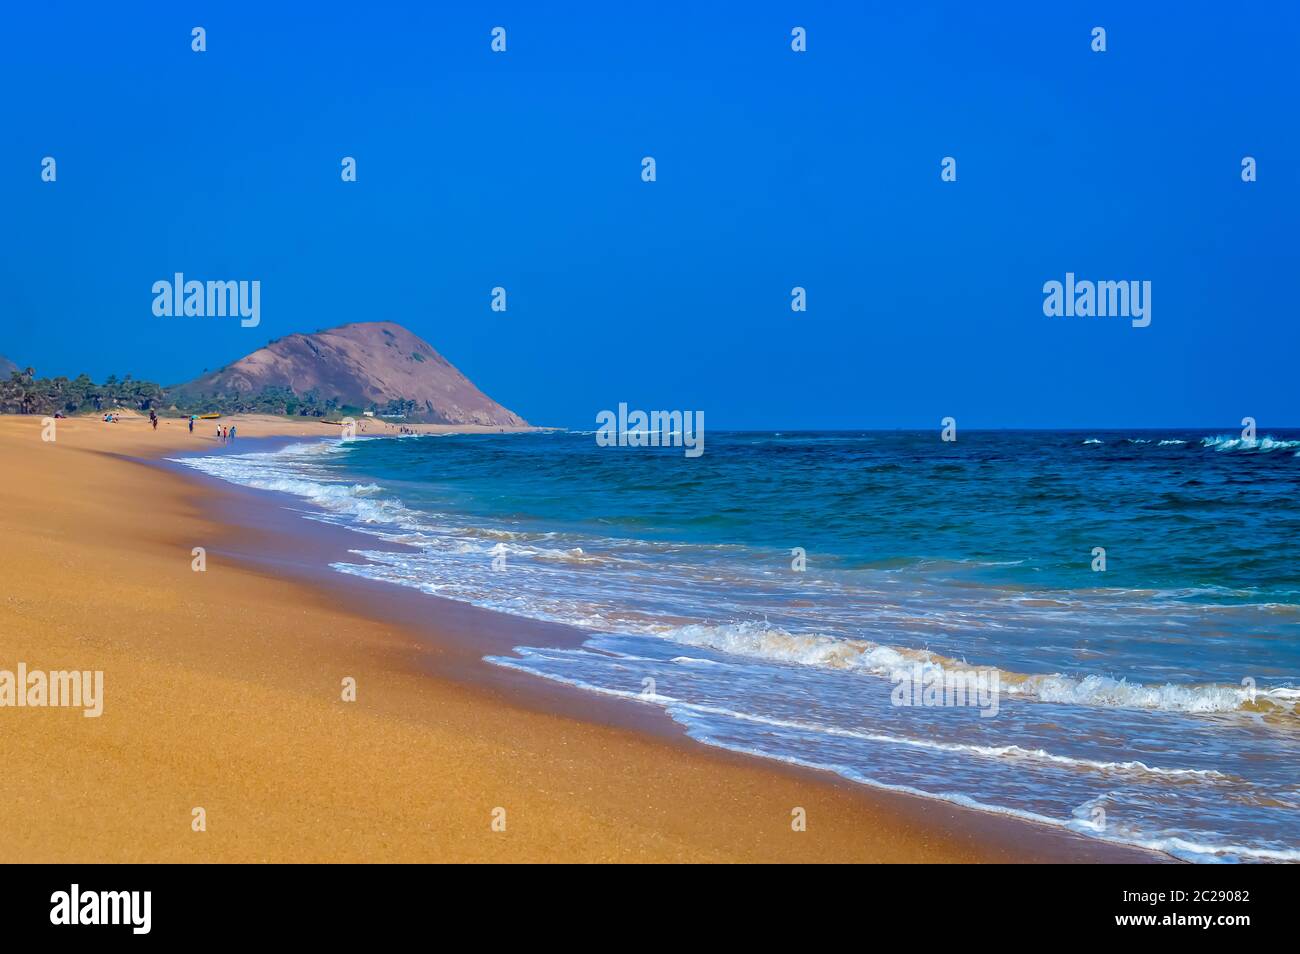 Wild Empty Tropical beach, vibrant yellow sand, bright blue sky, crystal clear waters with water crashing on the shore at daytime on a sunny day Stock Photo